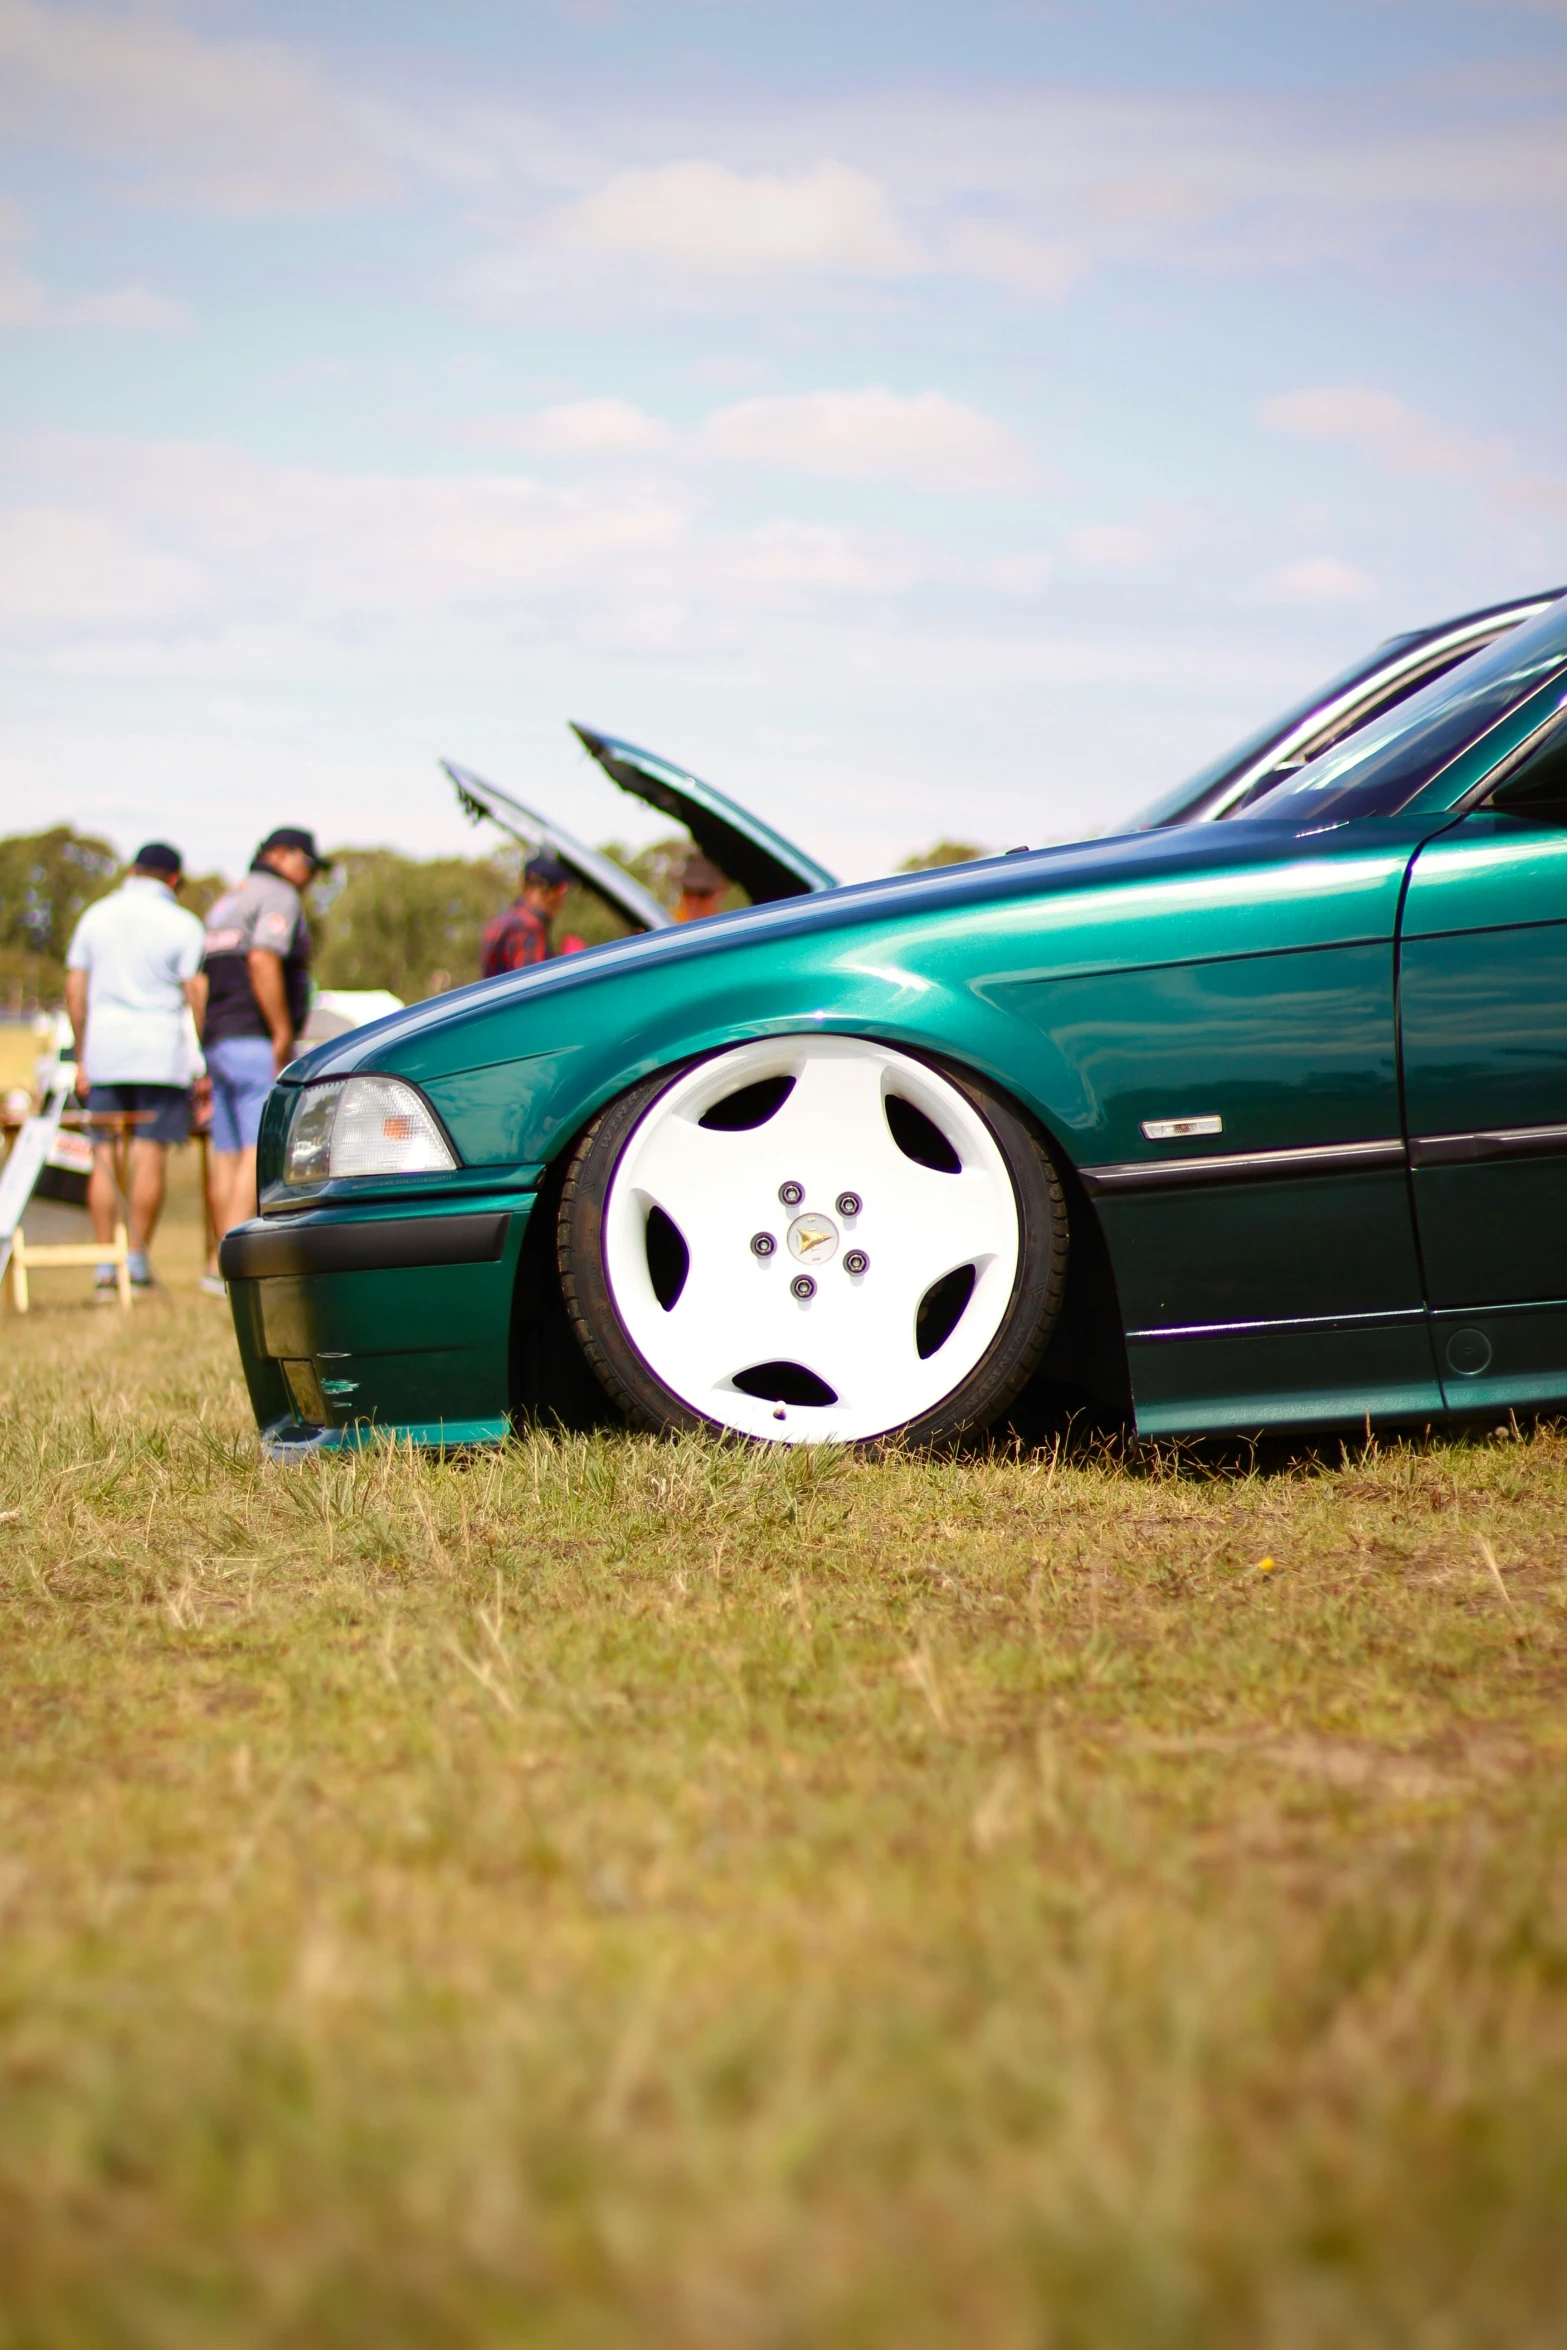 the front wheels on a green car show off the side of it's hood